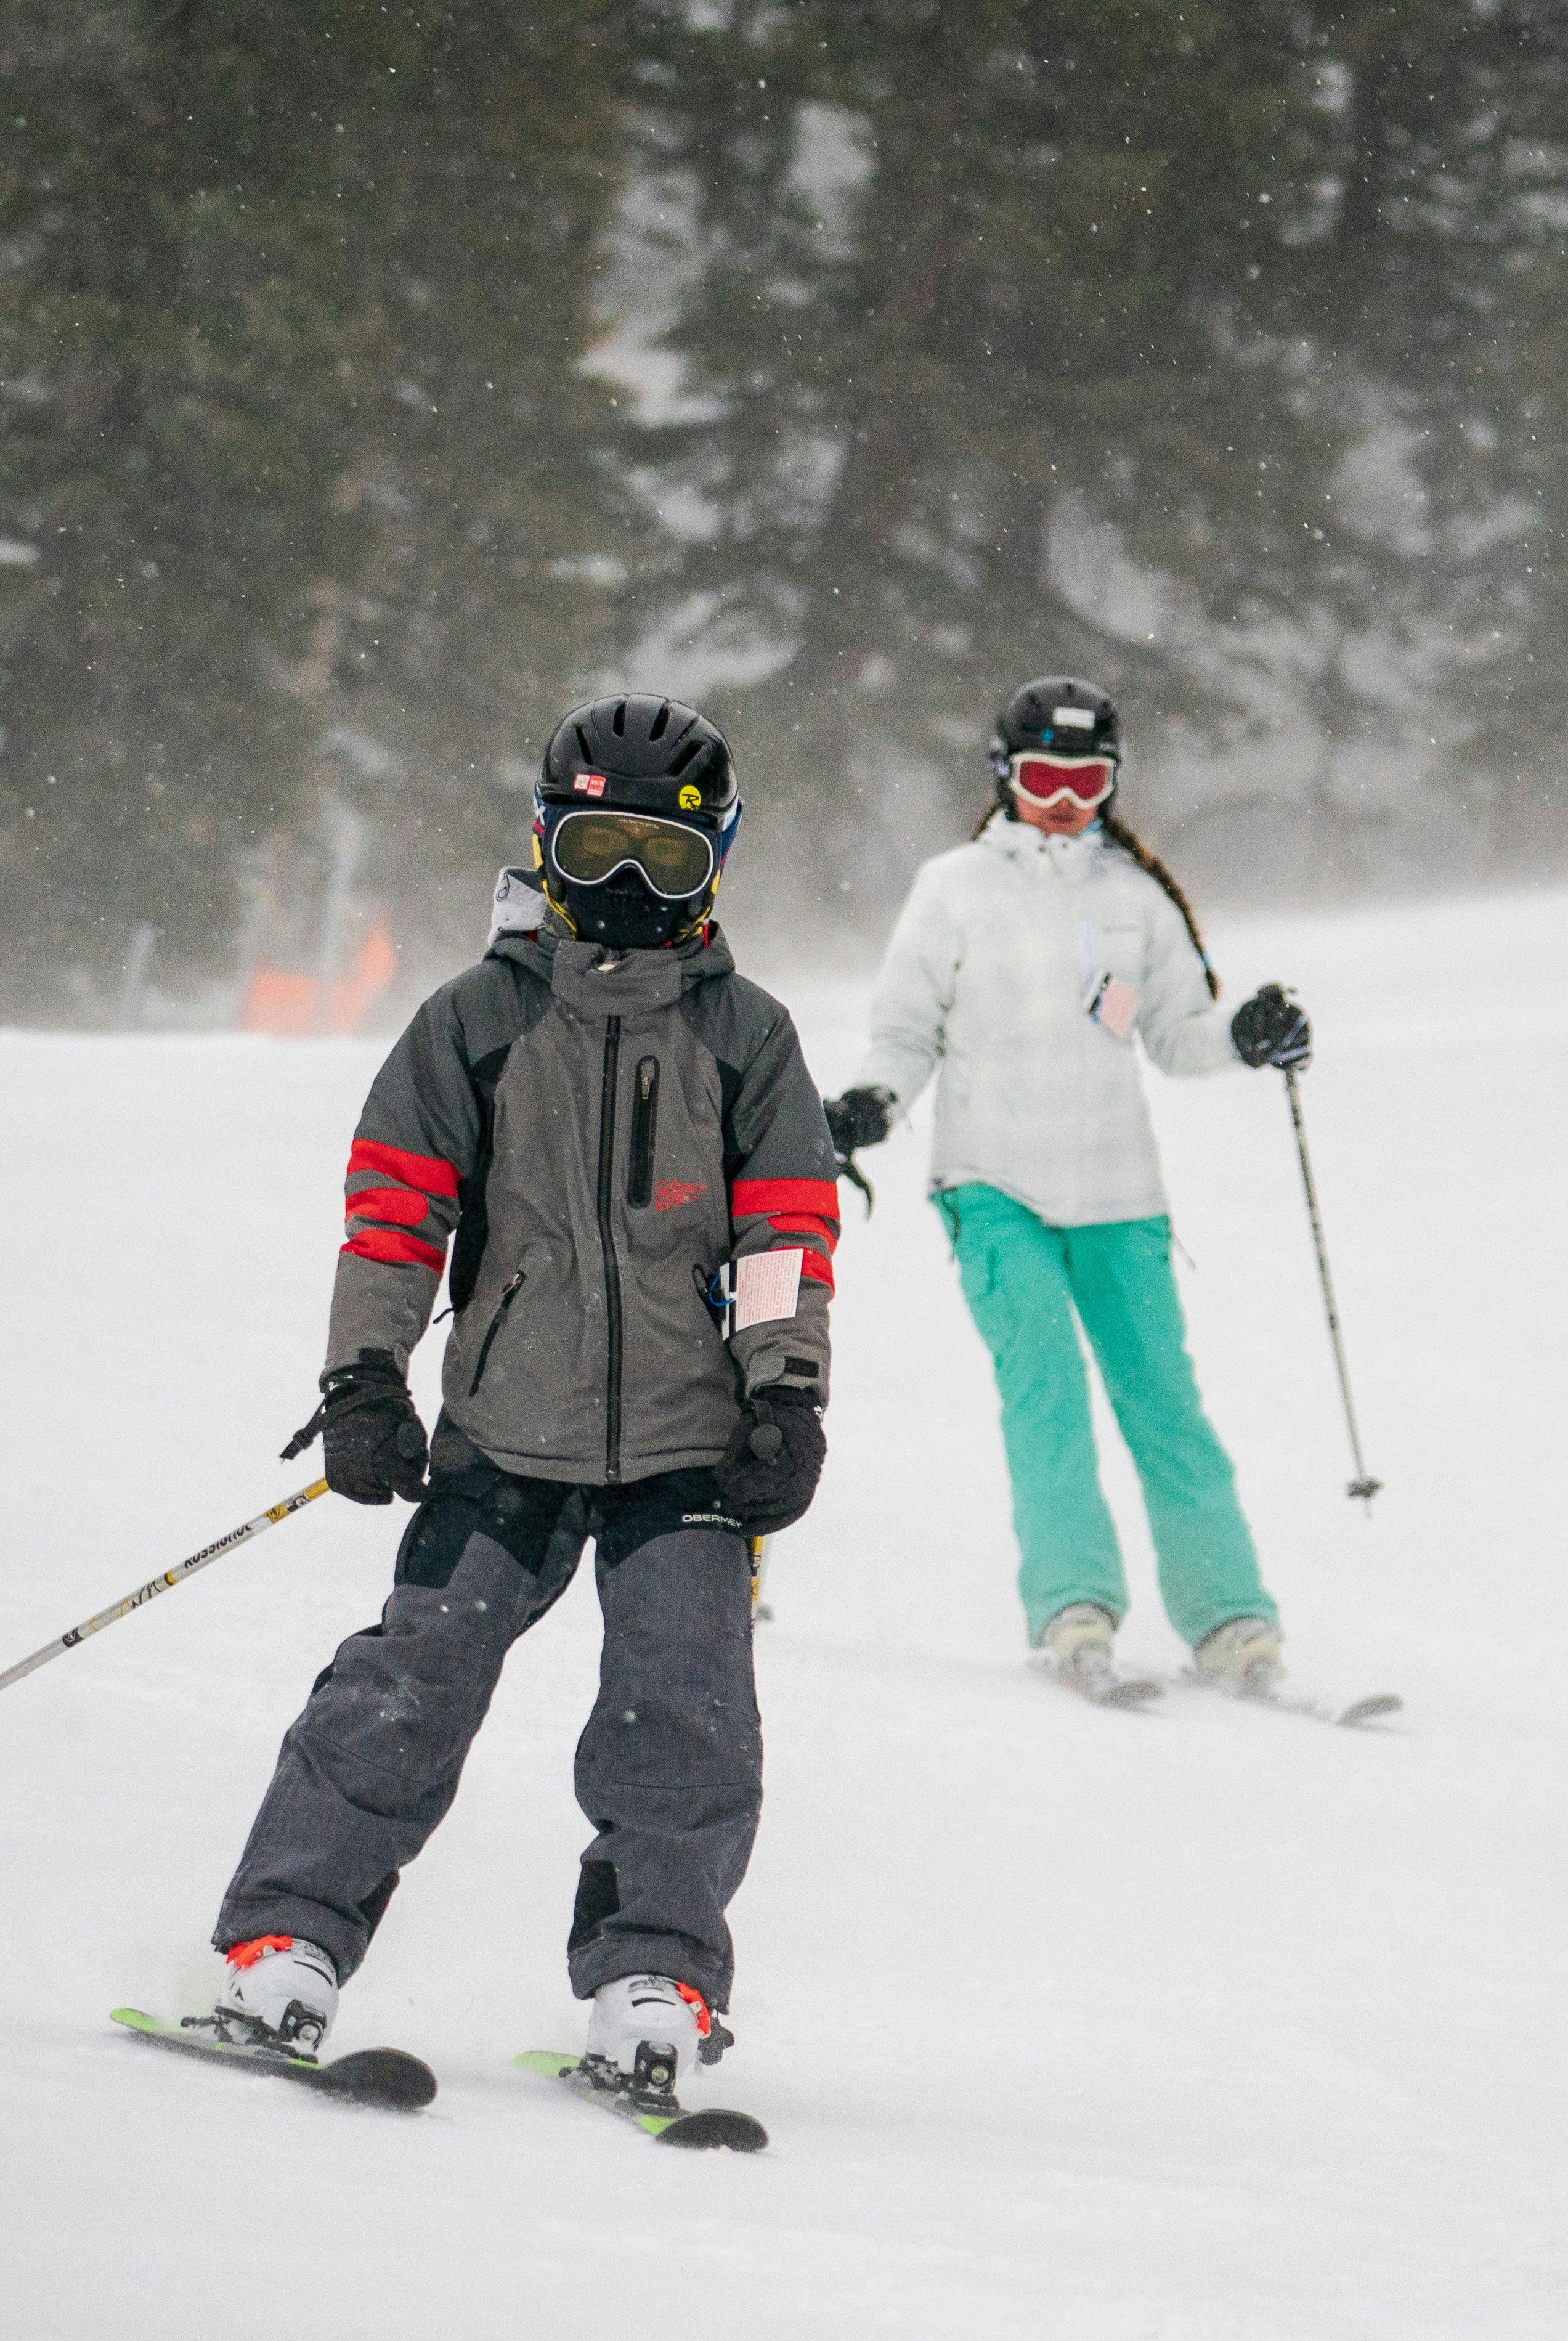 Kids skiing on a powdery day at Taos Ski Valley.